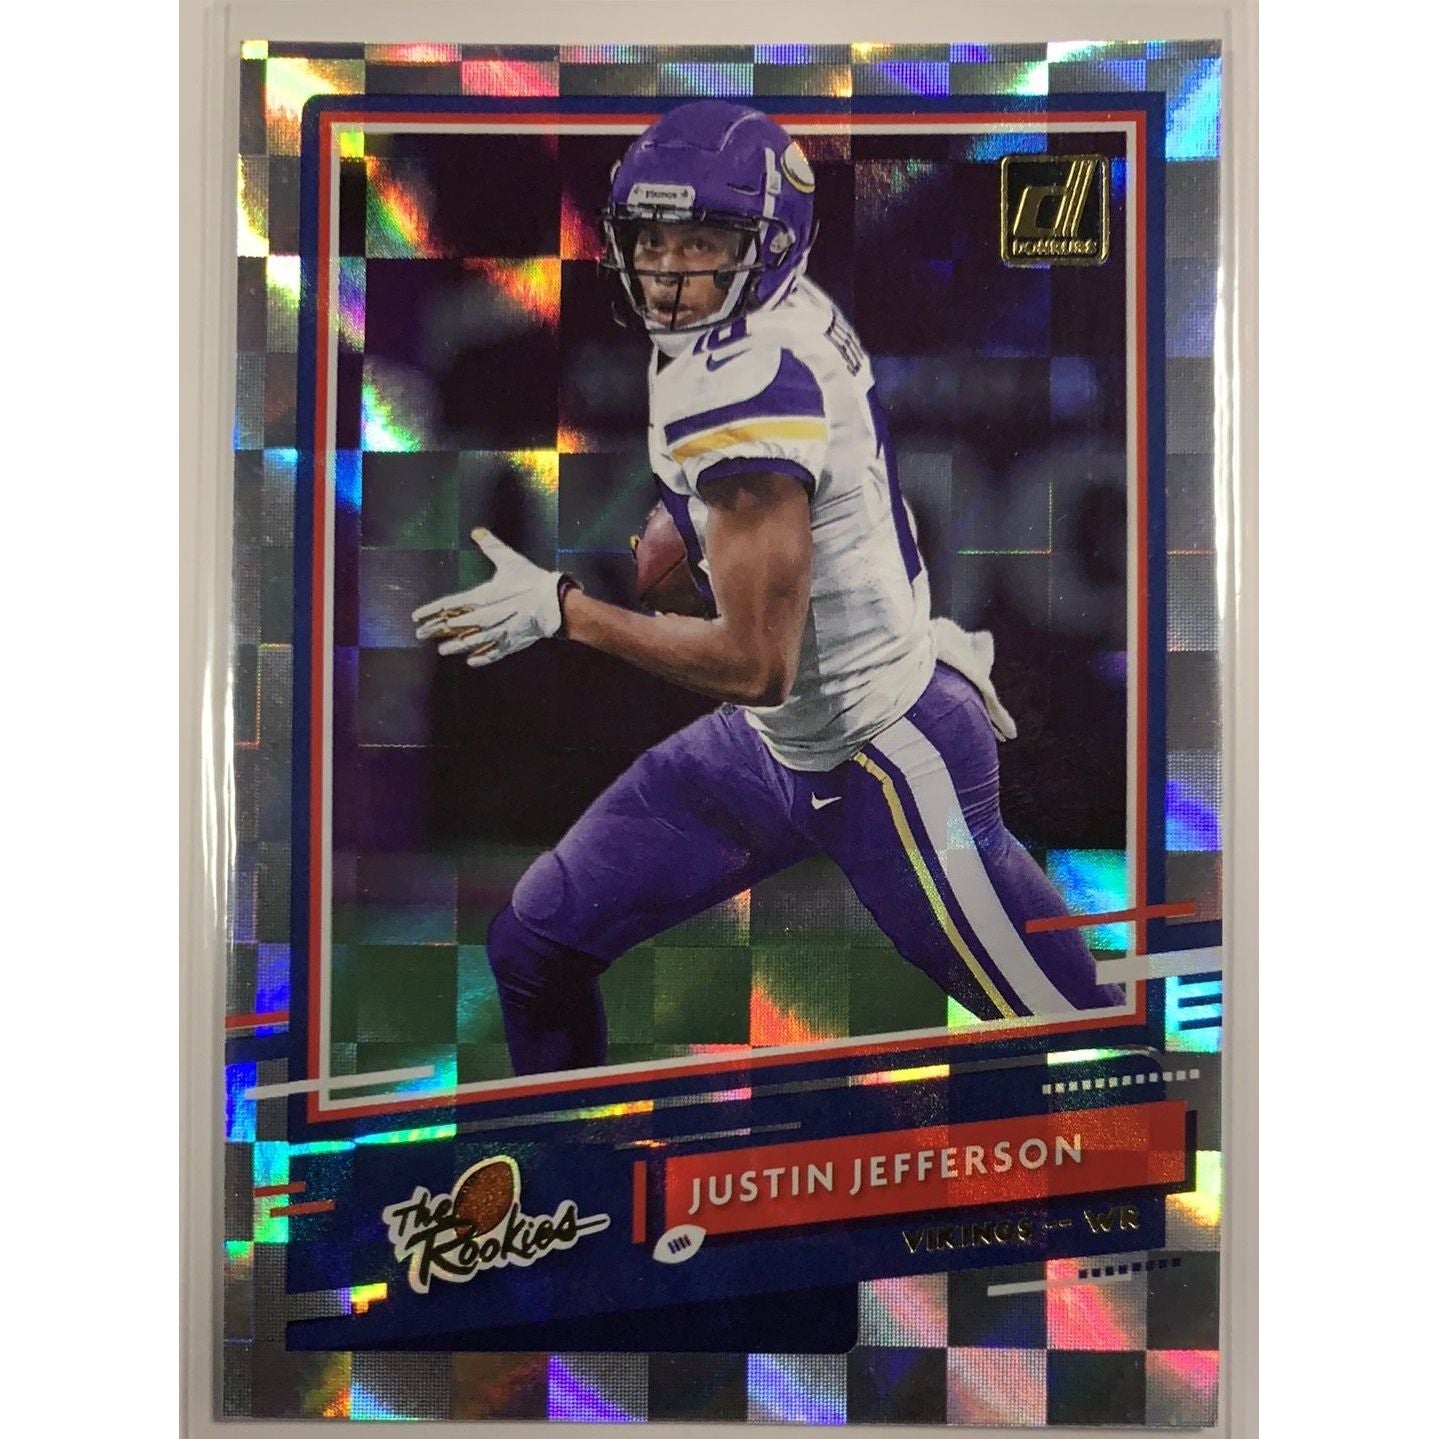  2020 Donruss Justin Jefferson The Rookies  Local Legends Cards & Collectibles